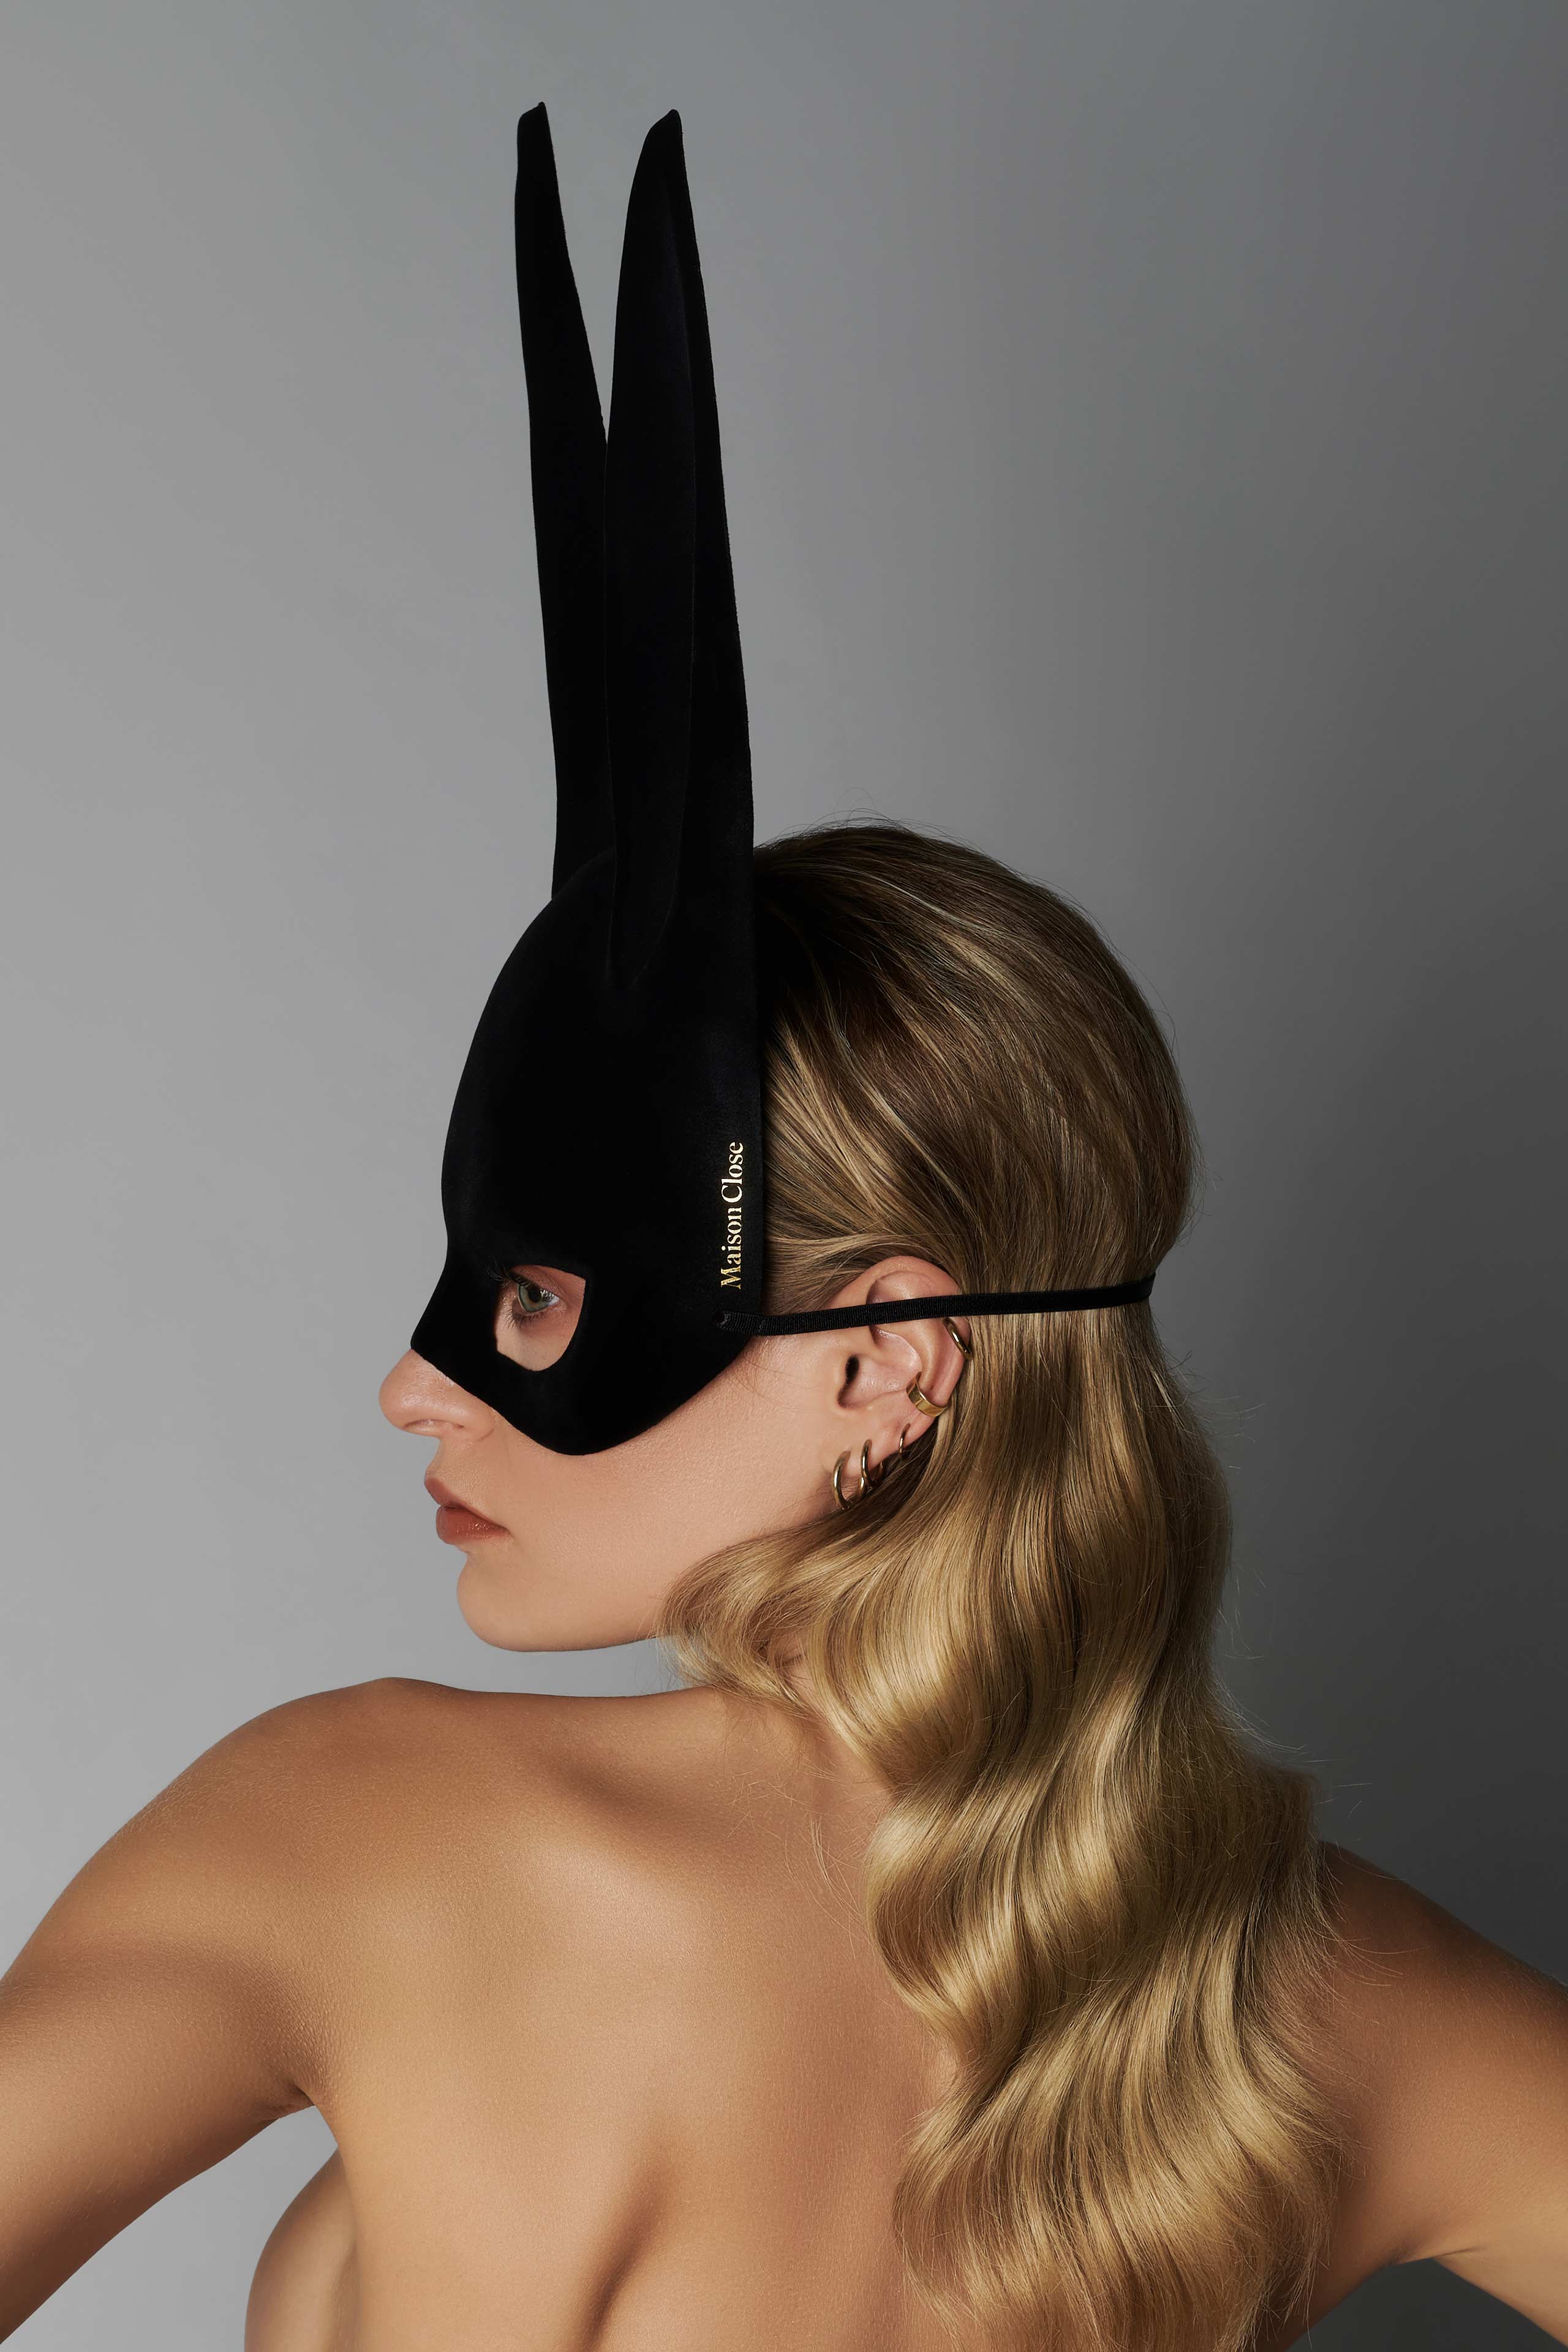 Bunny mask with tail - Les Fétiches